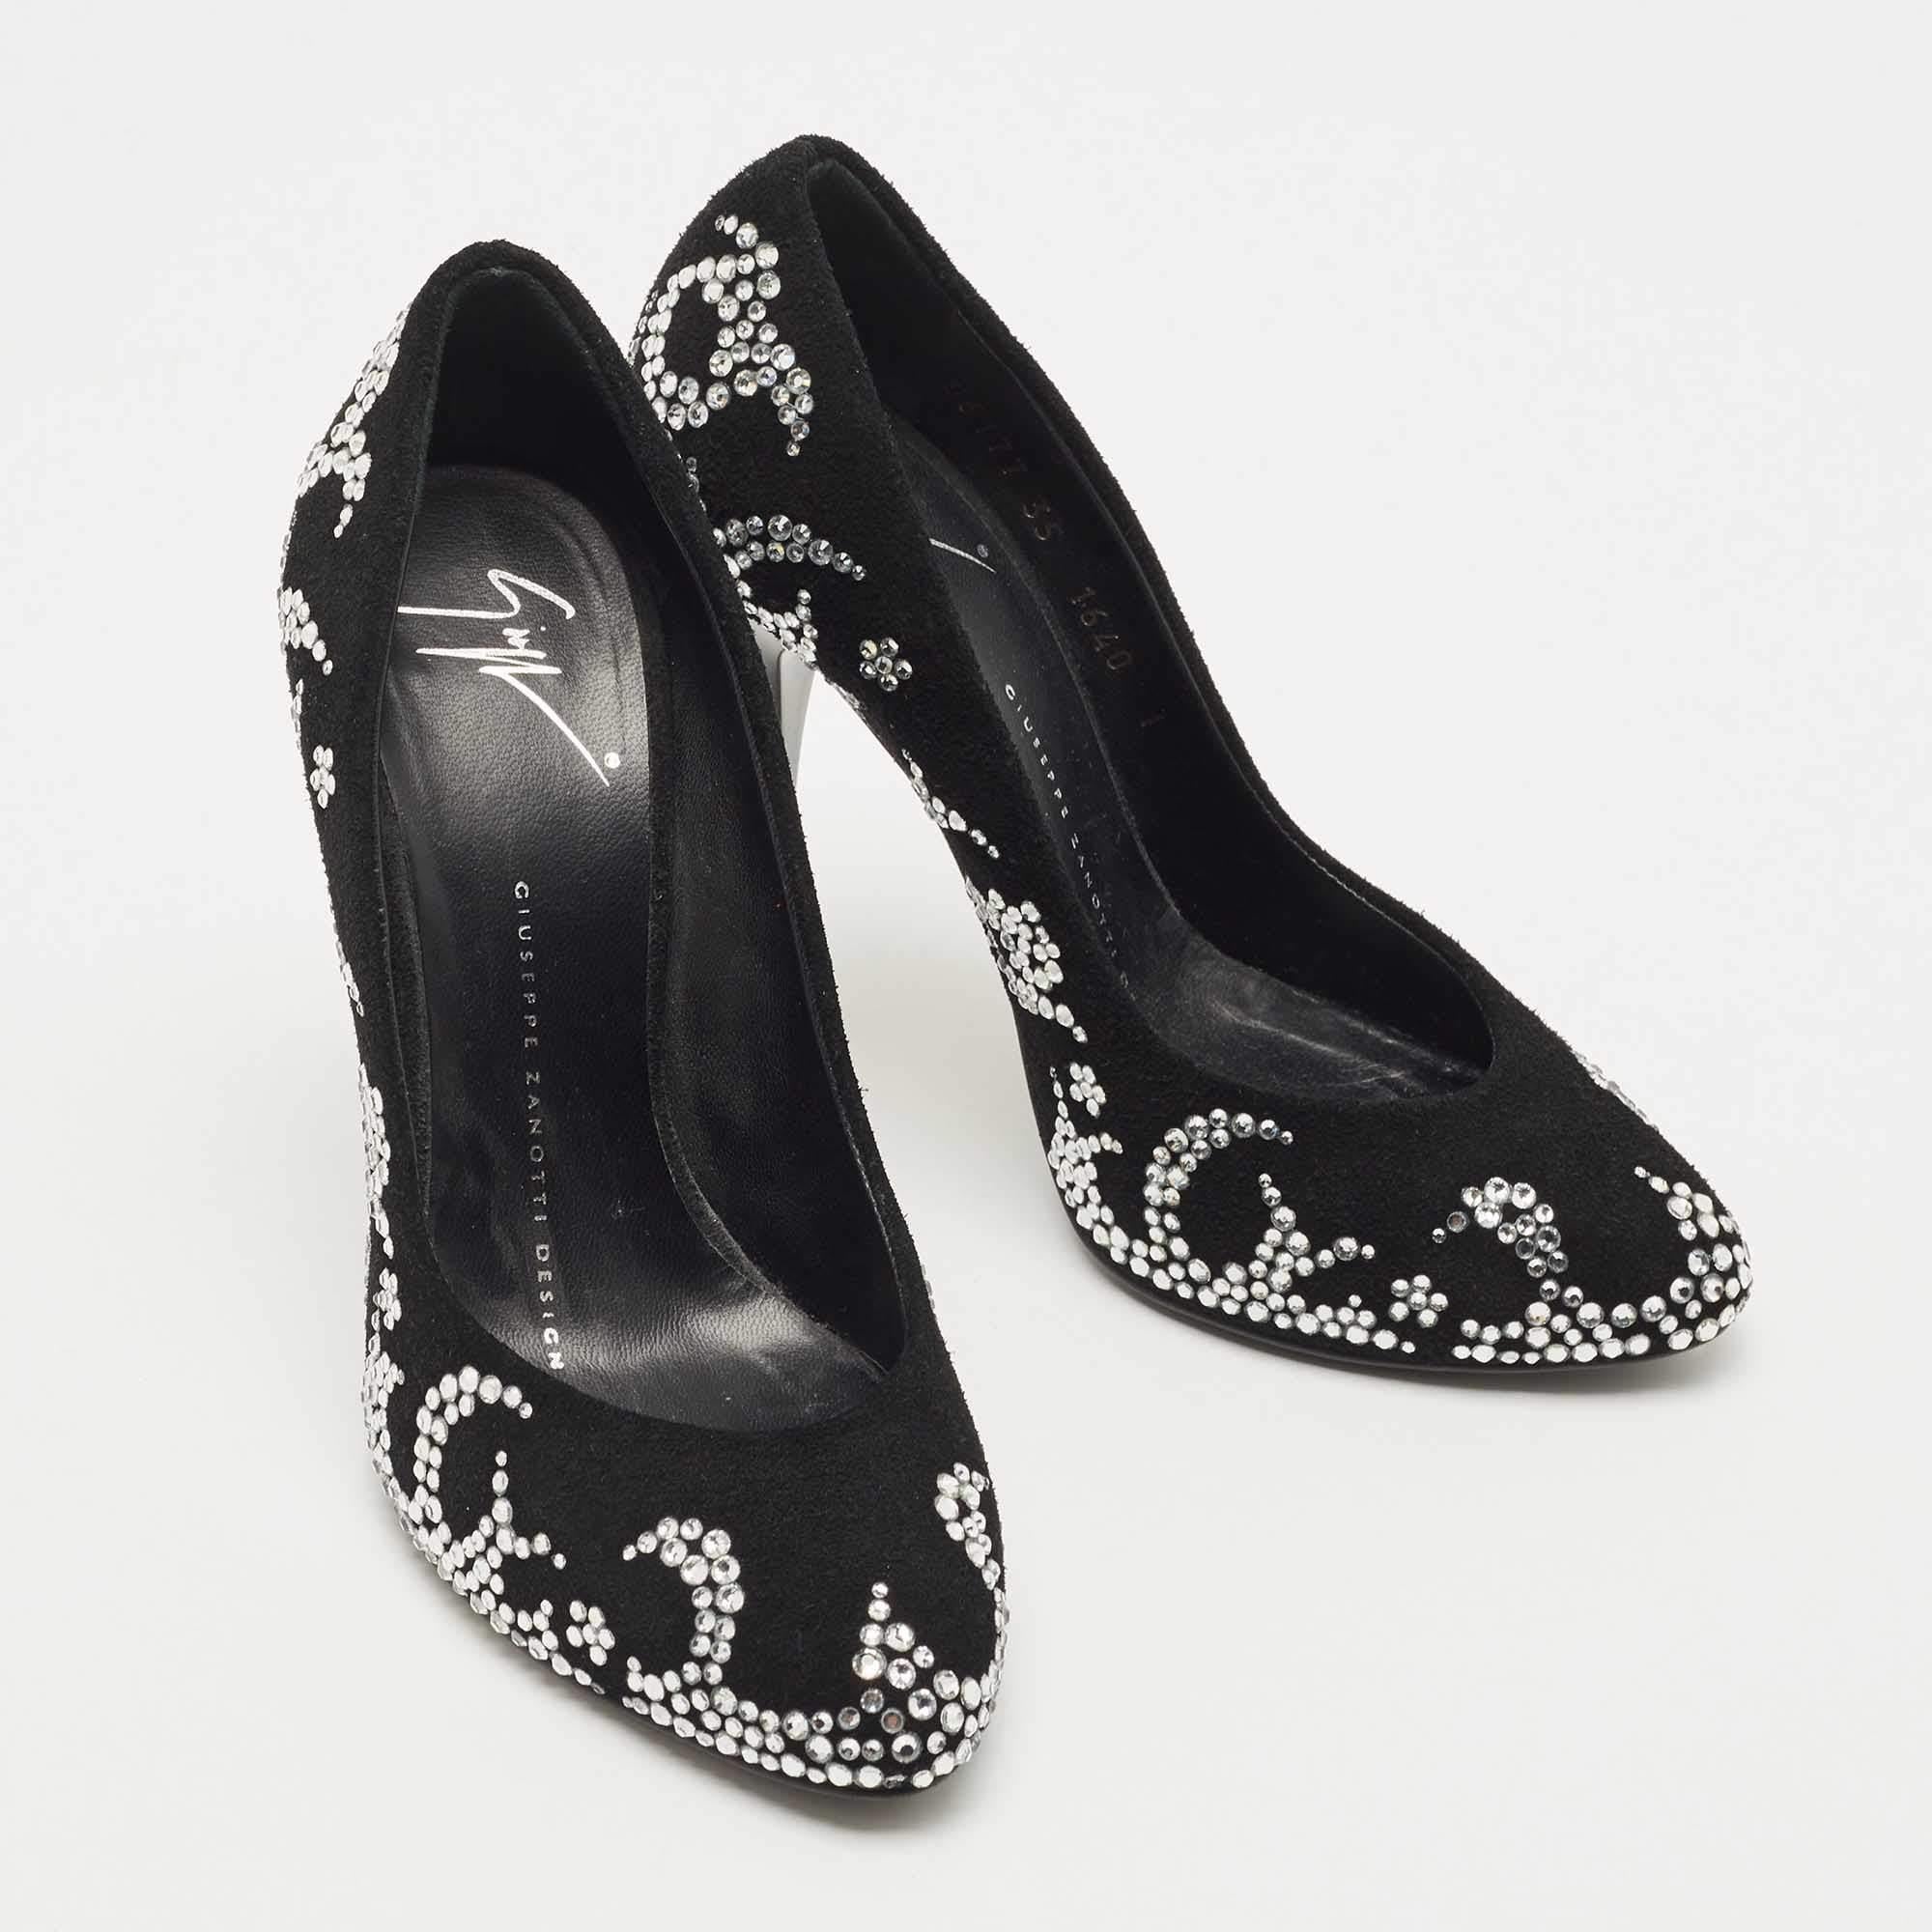 Giuseppe Zanotti Black Suede Crystal Embellished Pumps Size 35 In Good Condition For Sale In Dubai, Al Qouz 2